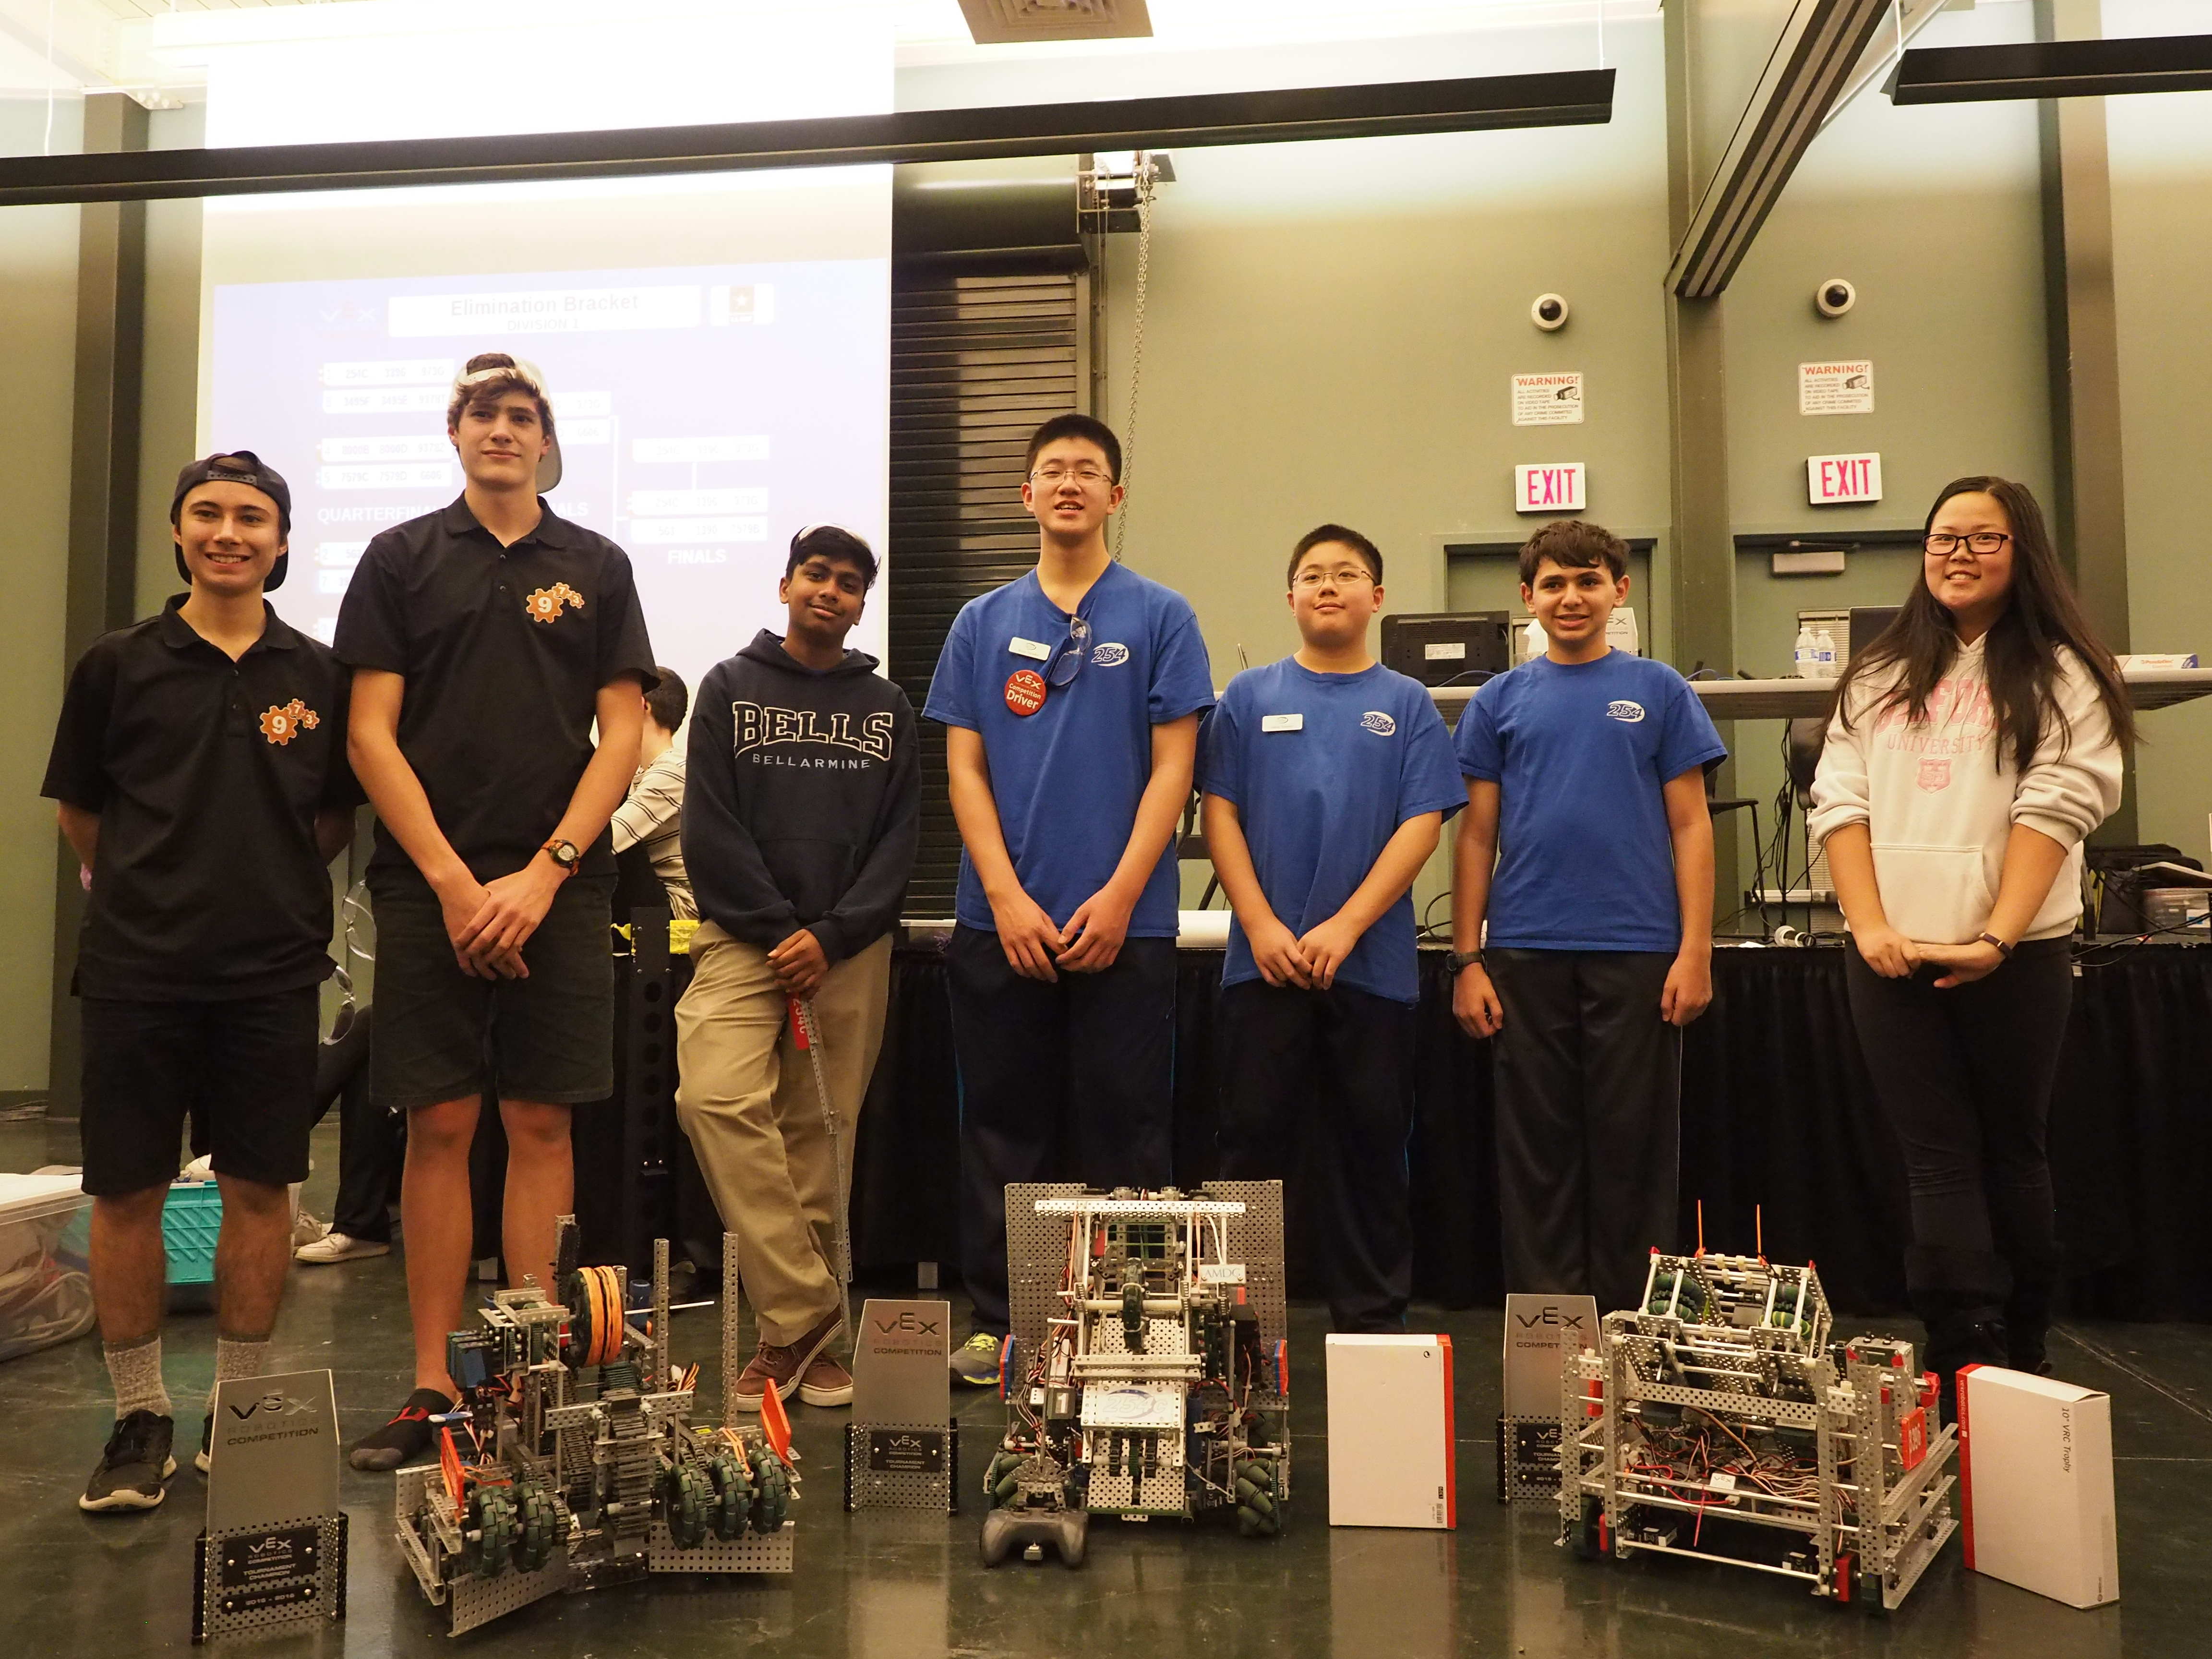 Team 254C poses with their robot, trophy, and alliance partners.